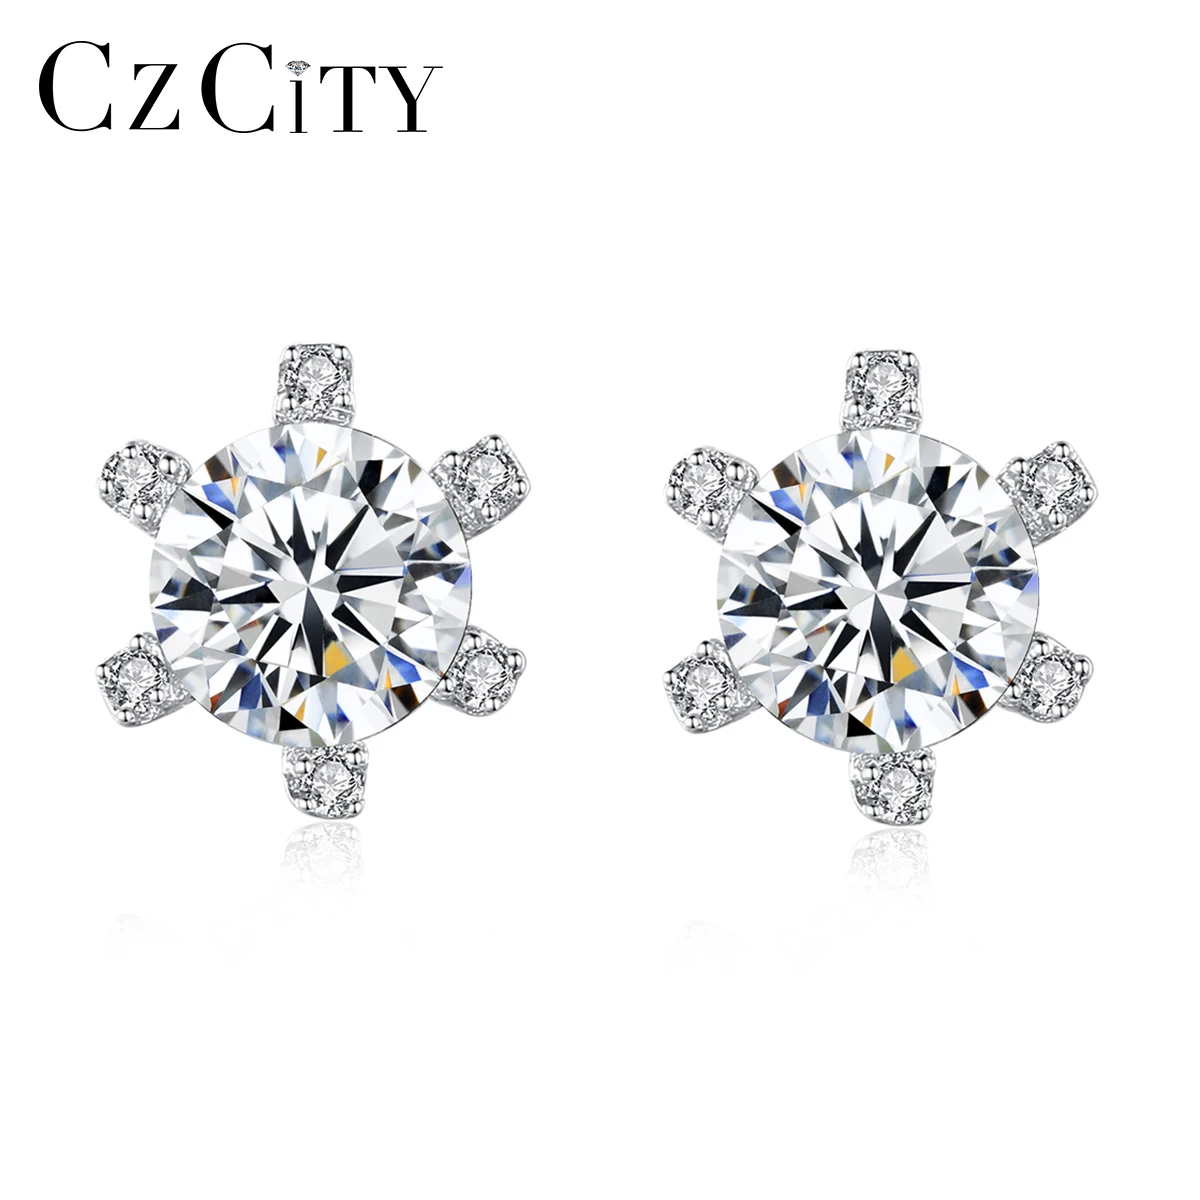 

CZCITY Round 1 Carat Moissanite Snowflake Stud Earrings for Women Wedding Engagement Fine Jewelry 925 Sterling Silver CZ Gifts